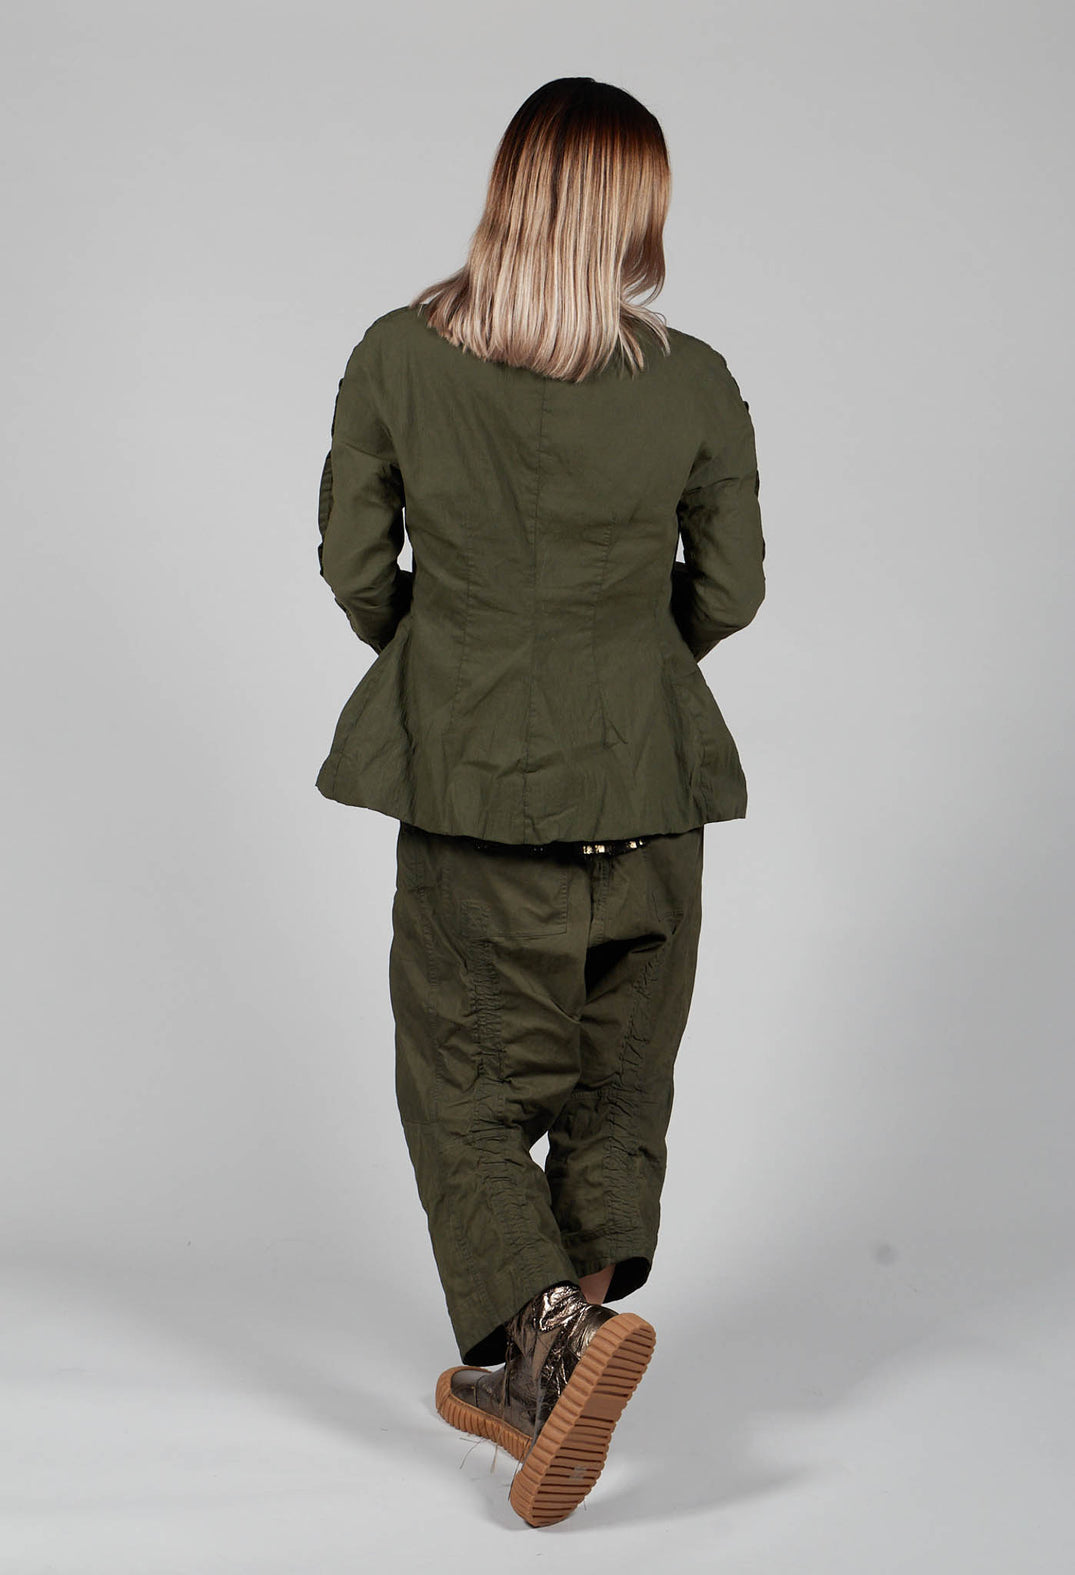 Ruched Fabric Collar Jacket With Statement Sleeves in Olive